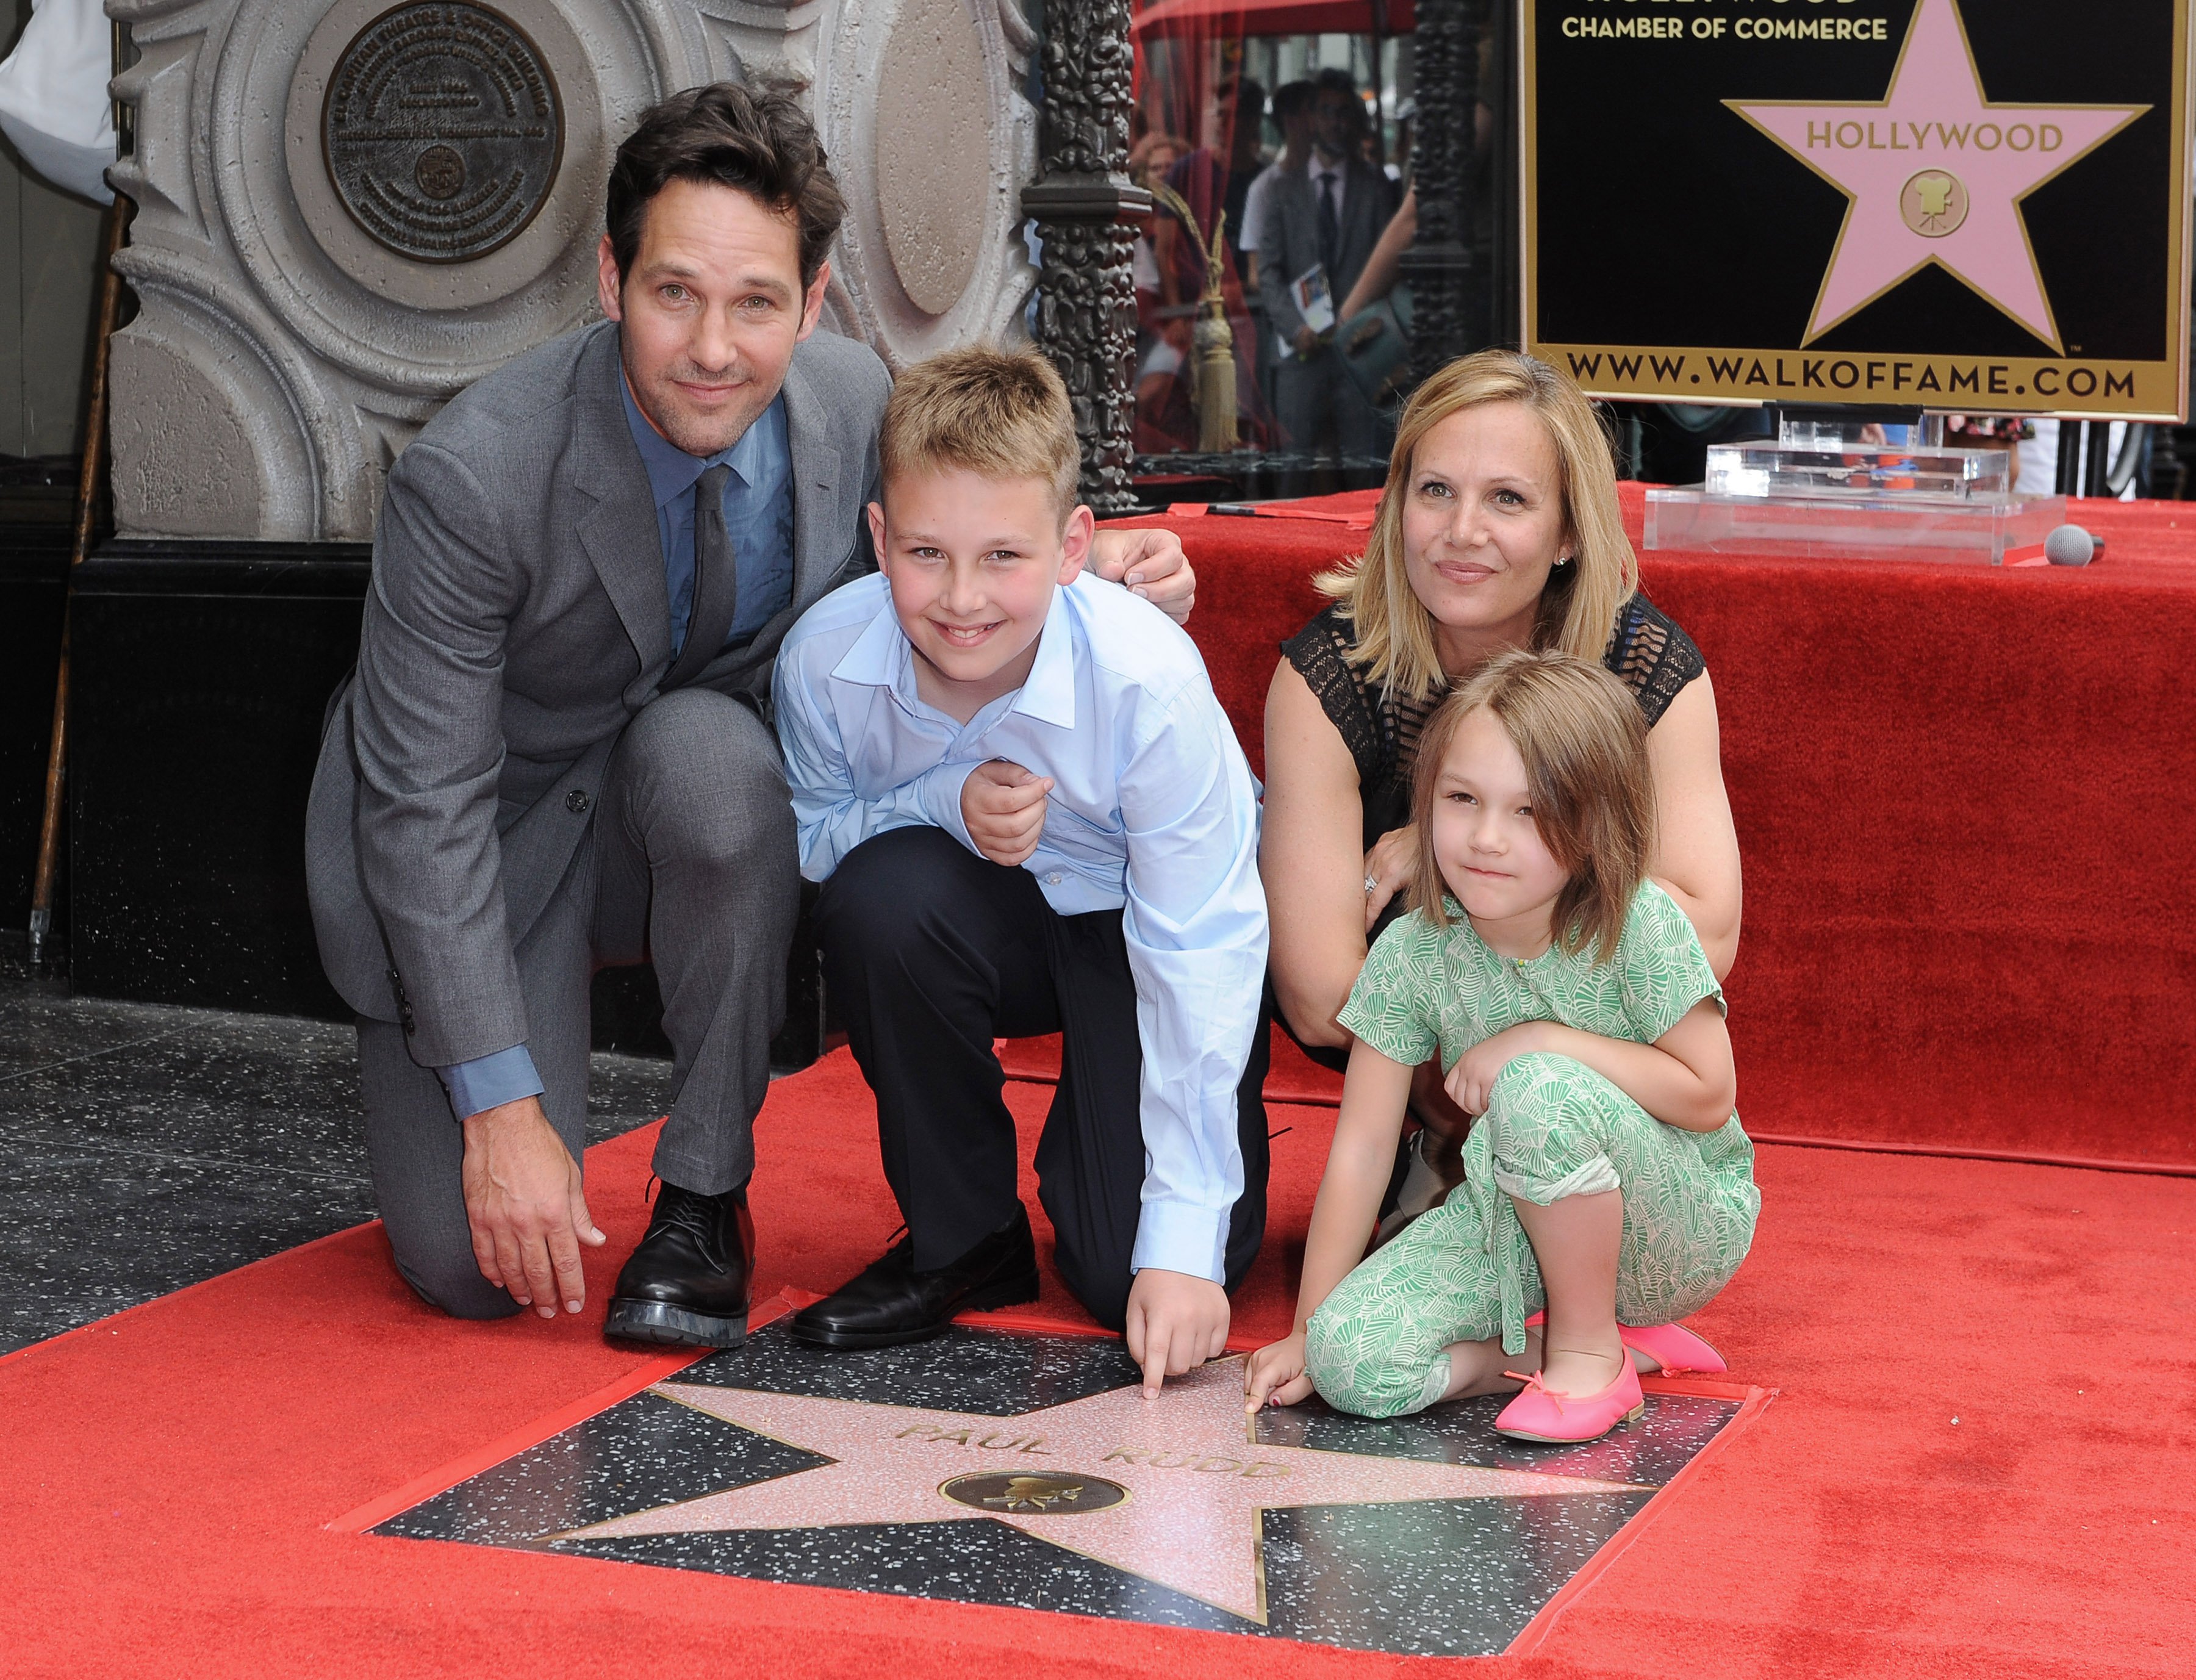 Paul Rudd, his wife Julie Yaeger, with their two children Jack and Darby Rudd at the Hollywood Walk of Fame on July 1, 2015, in Hollywood, California. | Source: Getty Images